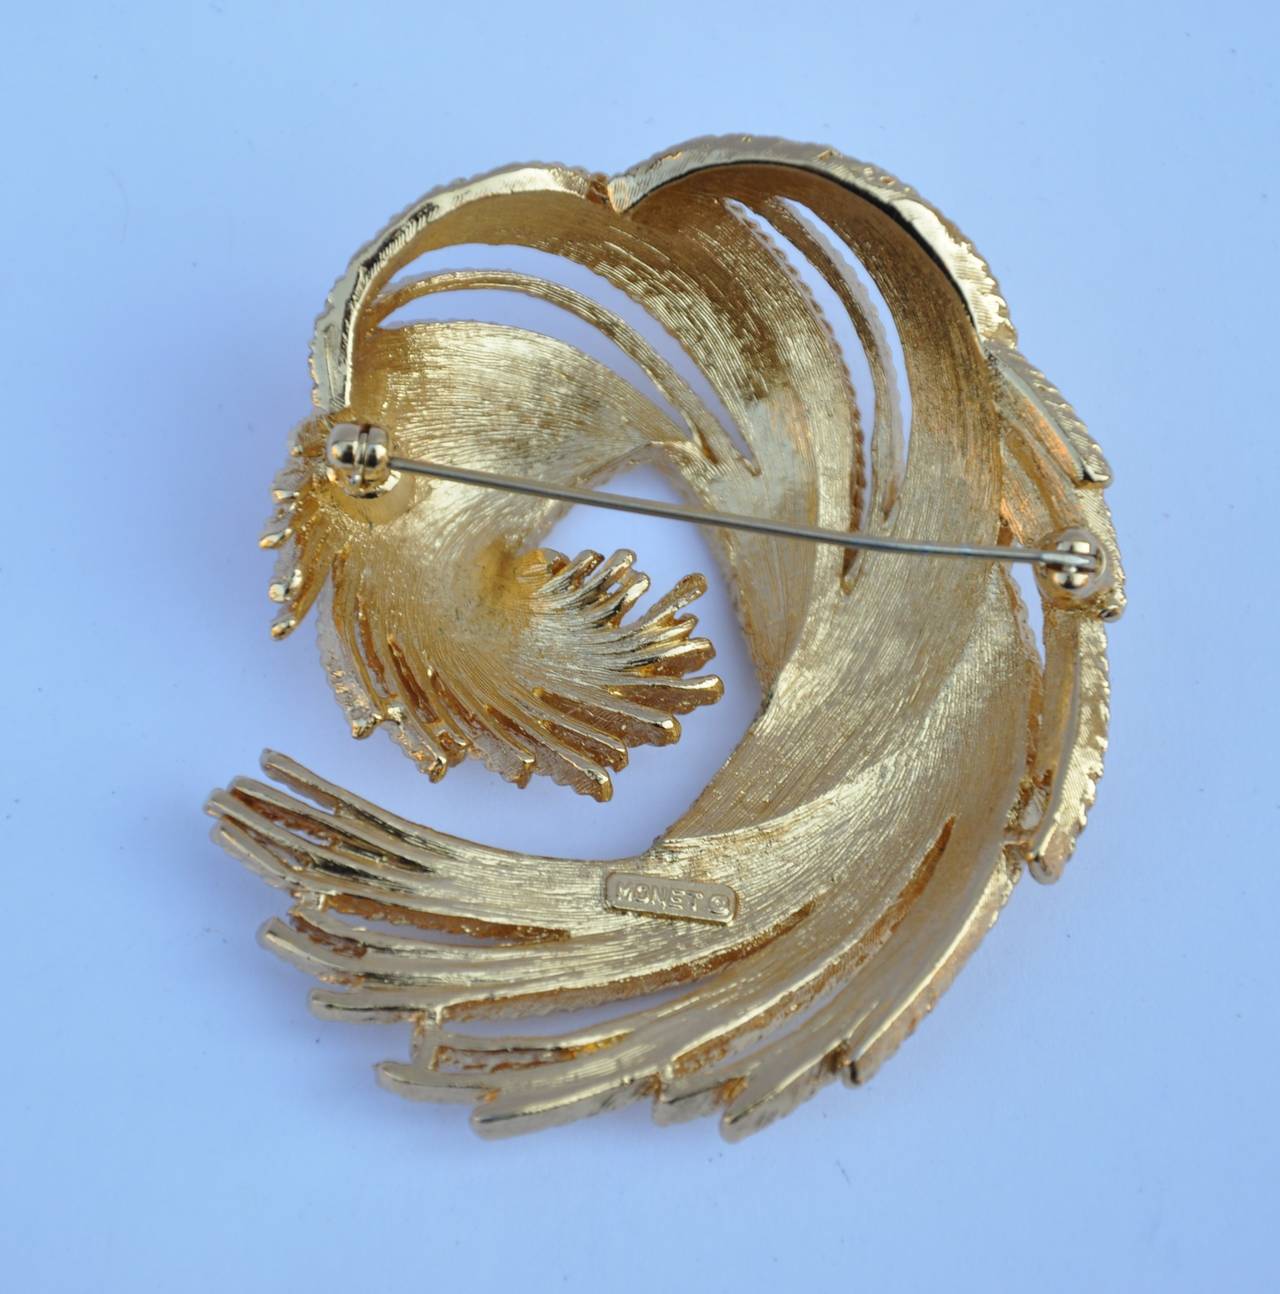 Monet's huge gold hardware "Swirl" brooch is signed "Monet" on the back. The length measures 2 1/2", width is 2", depth is 3/4".